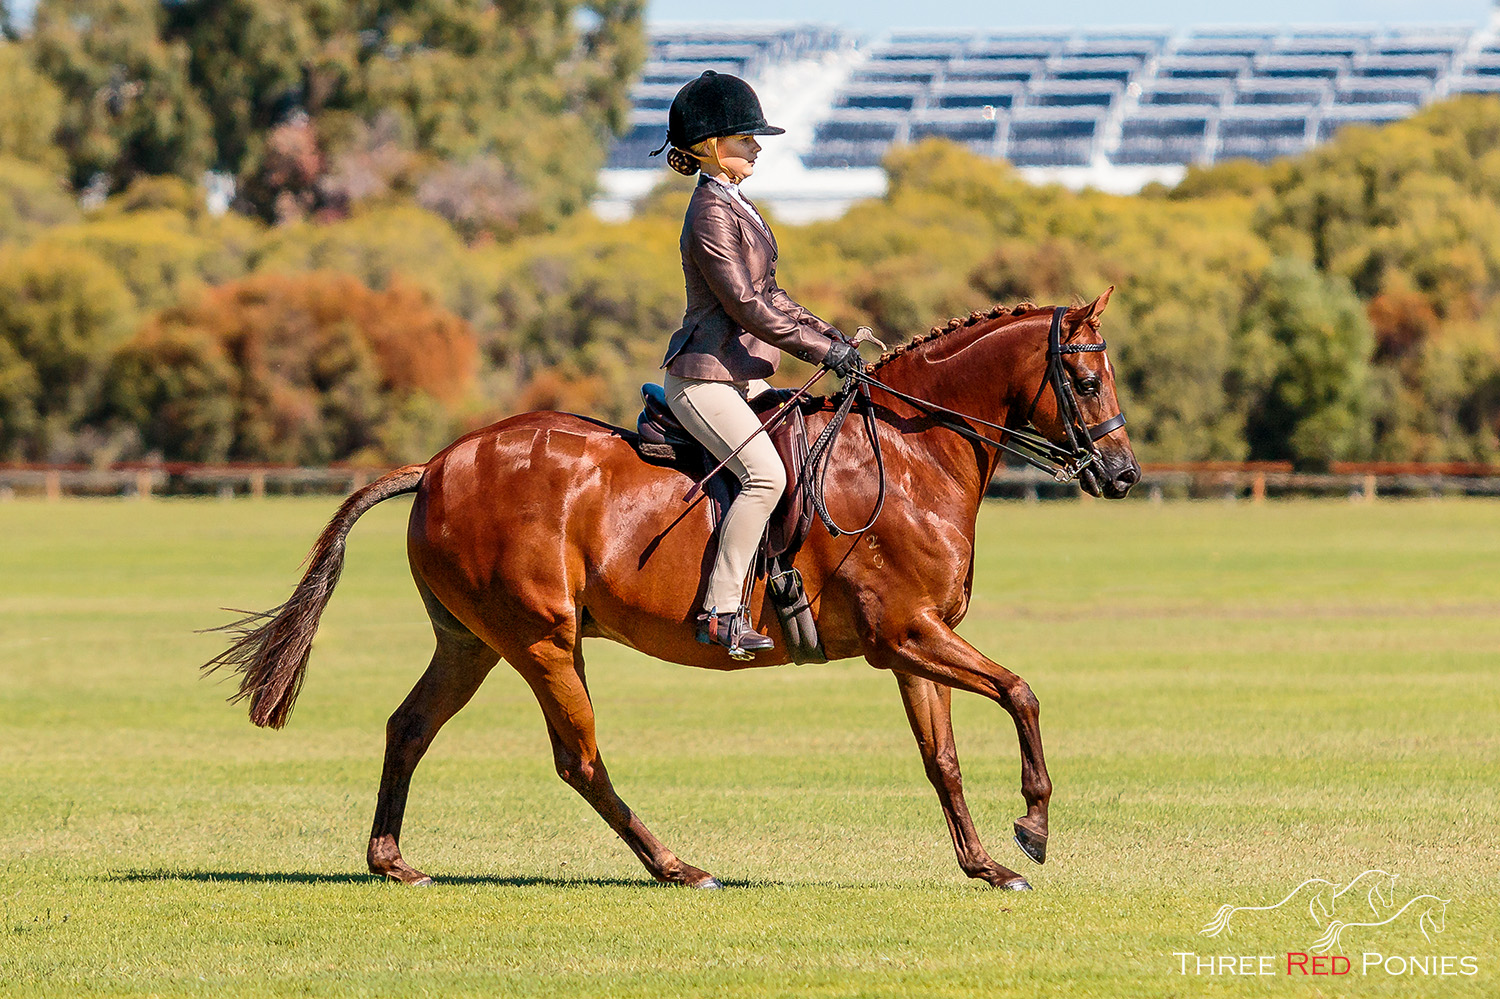 Chestnut pony cantering on grass - equestrian photography